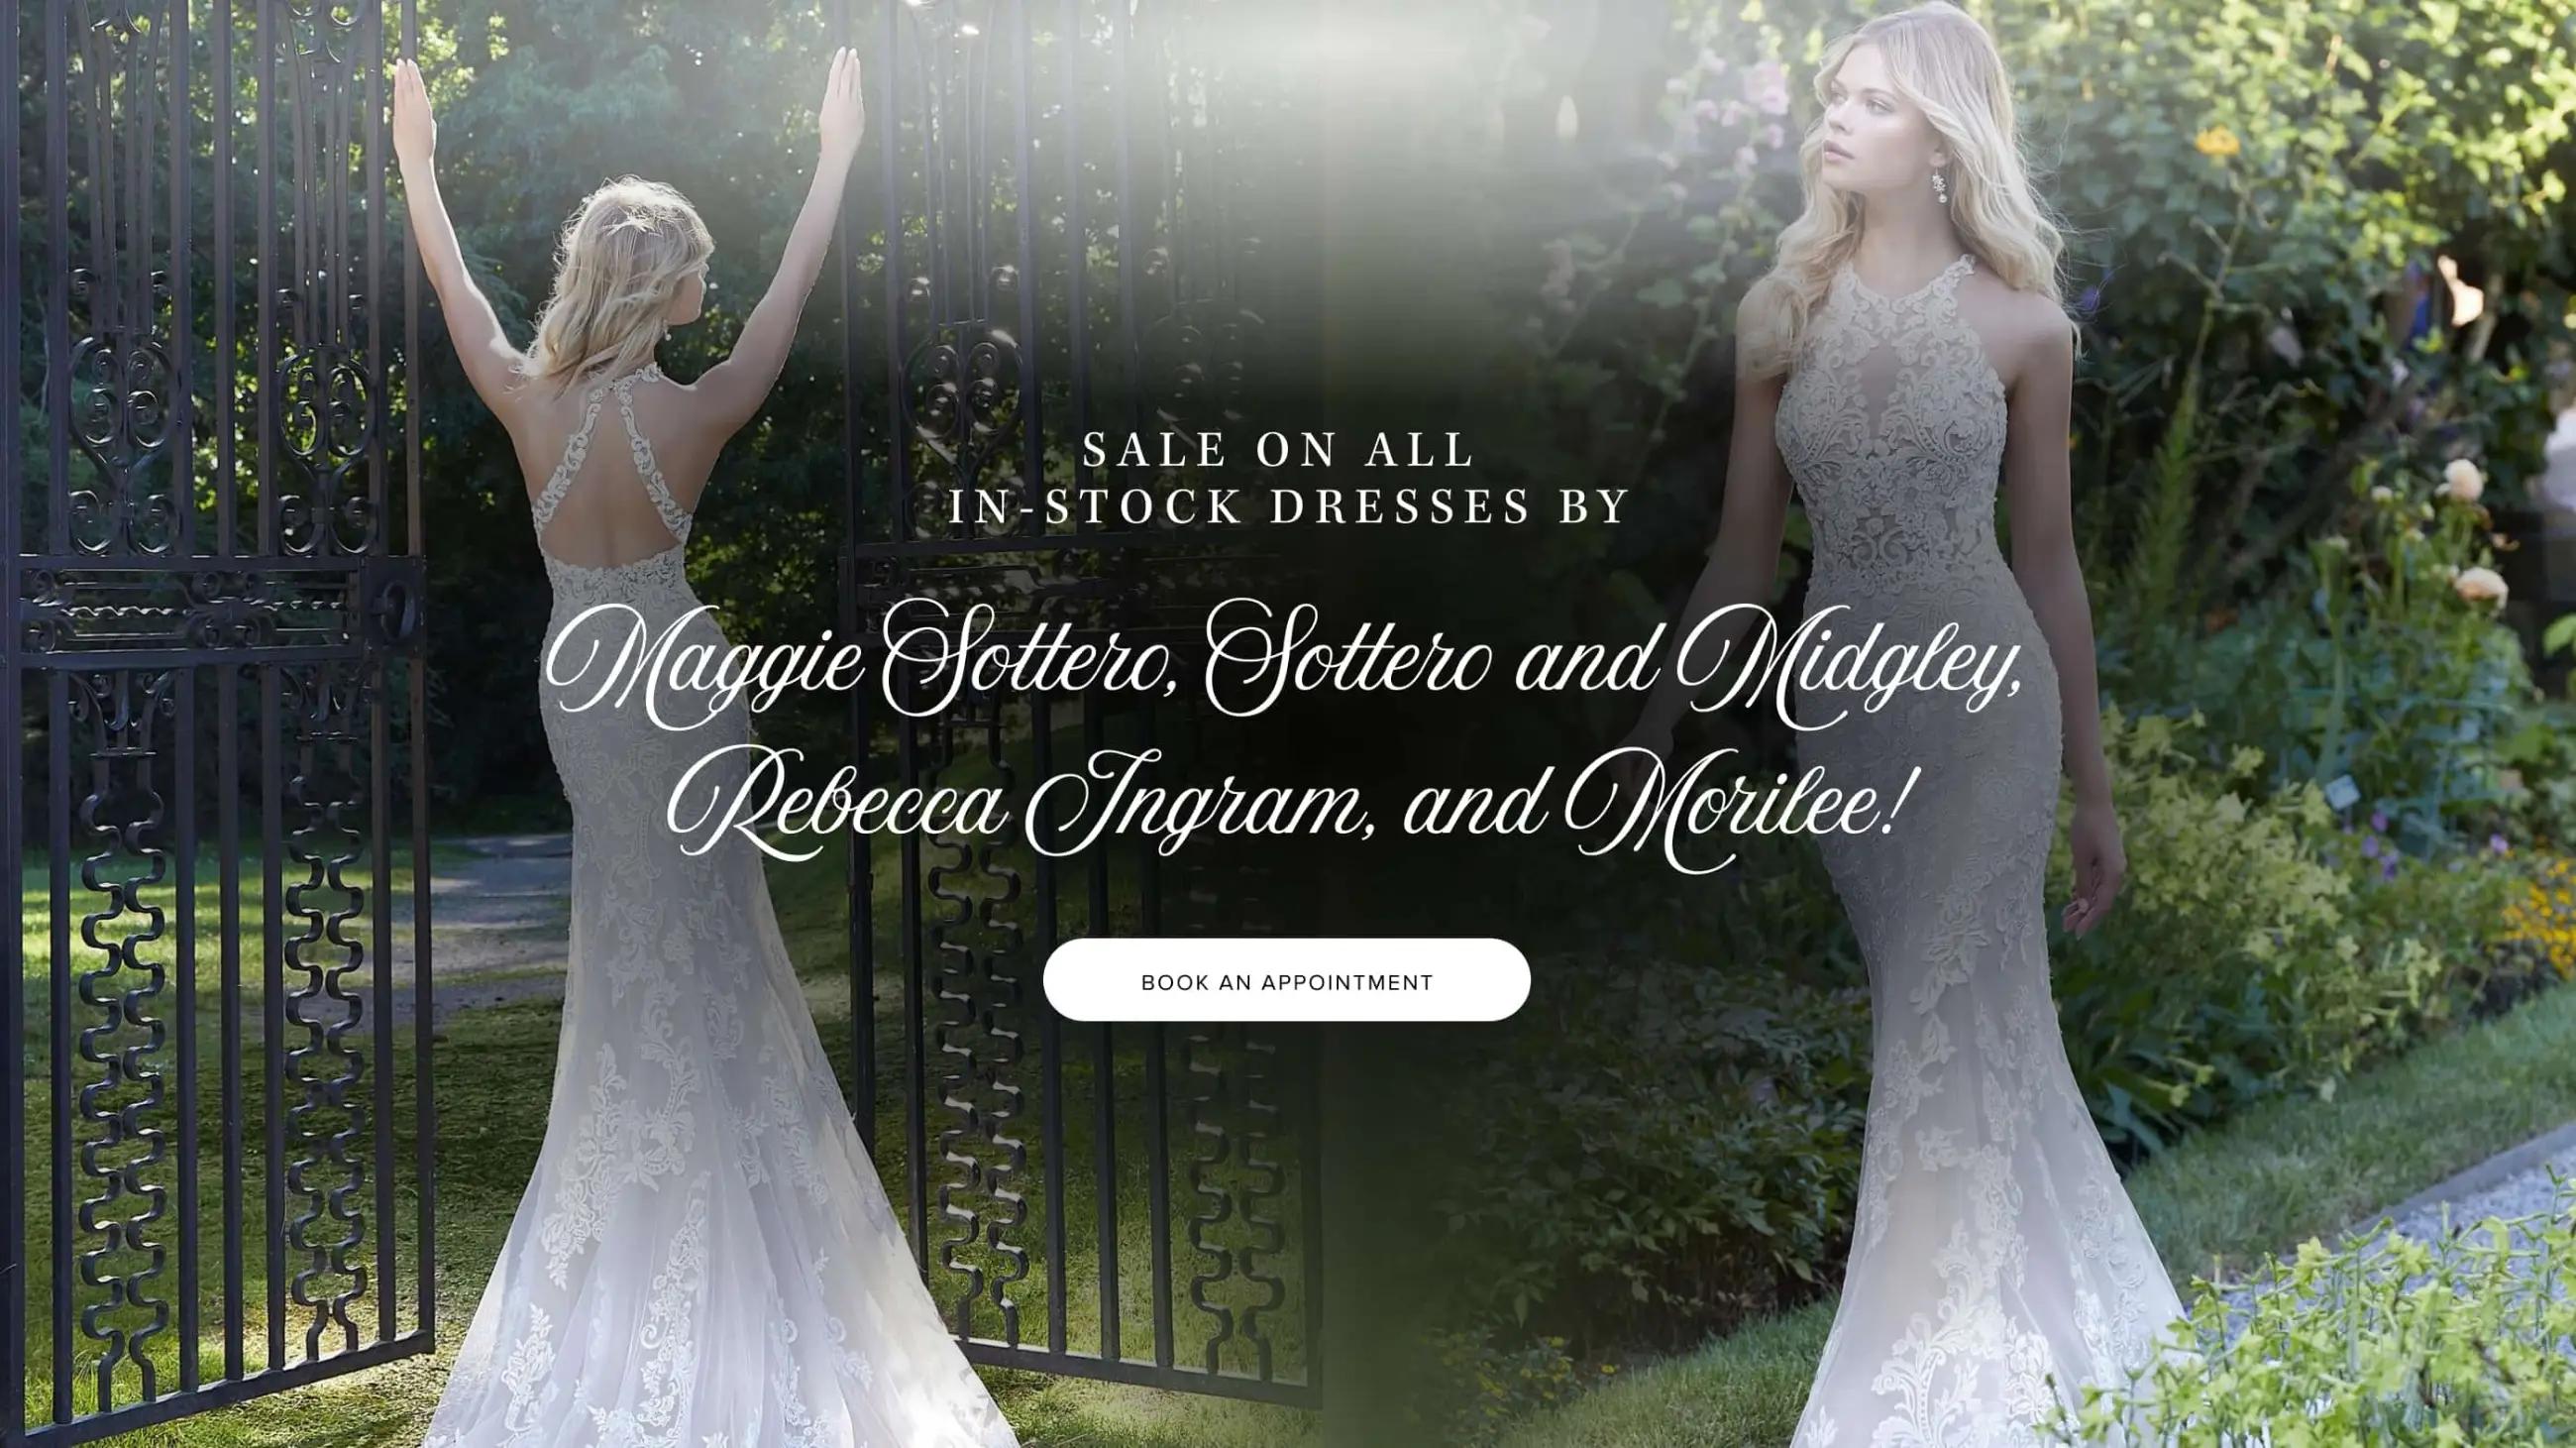 Sale on all in-stock dresses by Maggie Sottero, Rebecca Ingram, and Morilee!